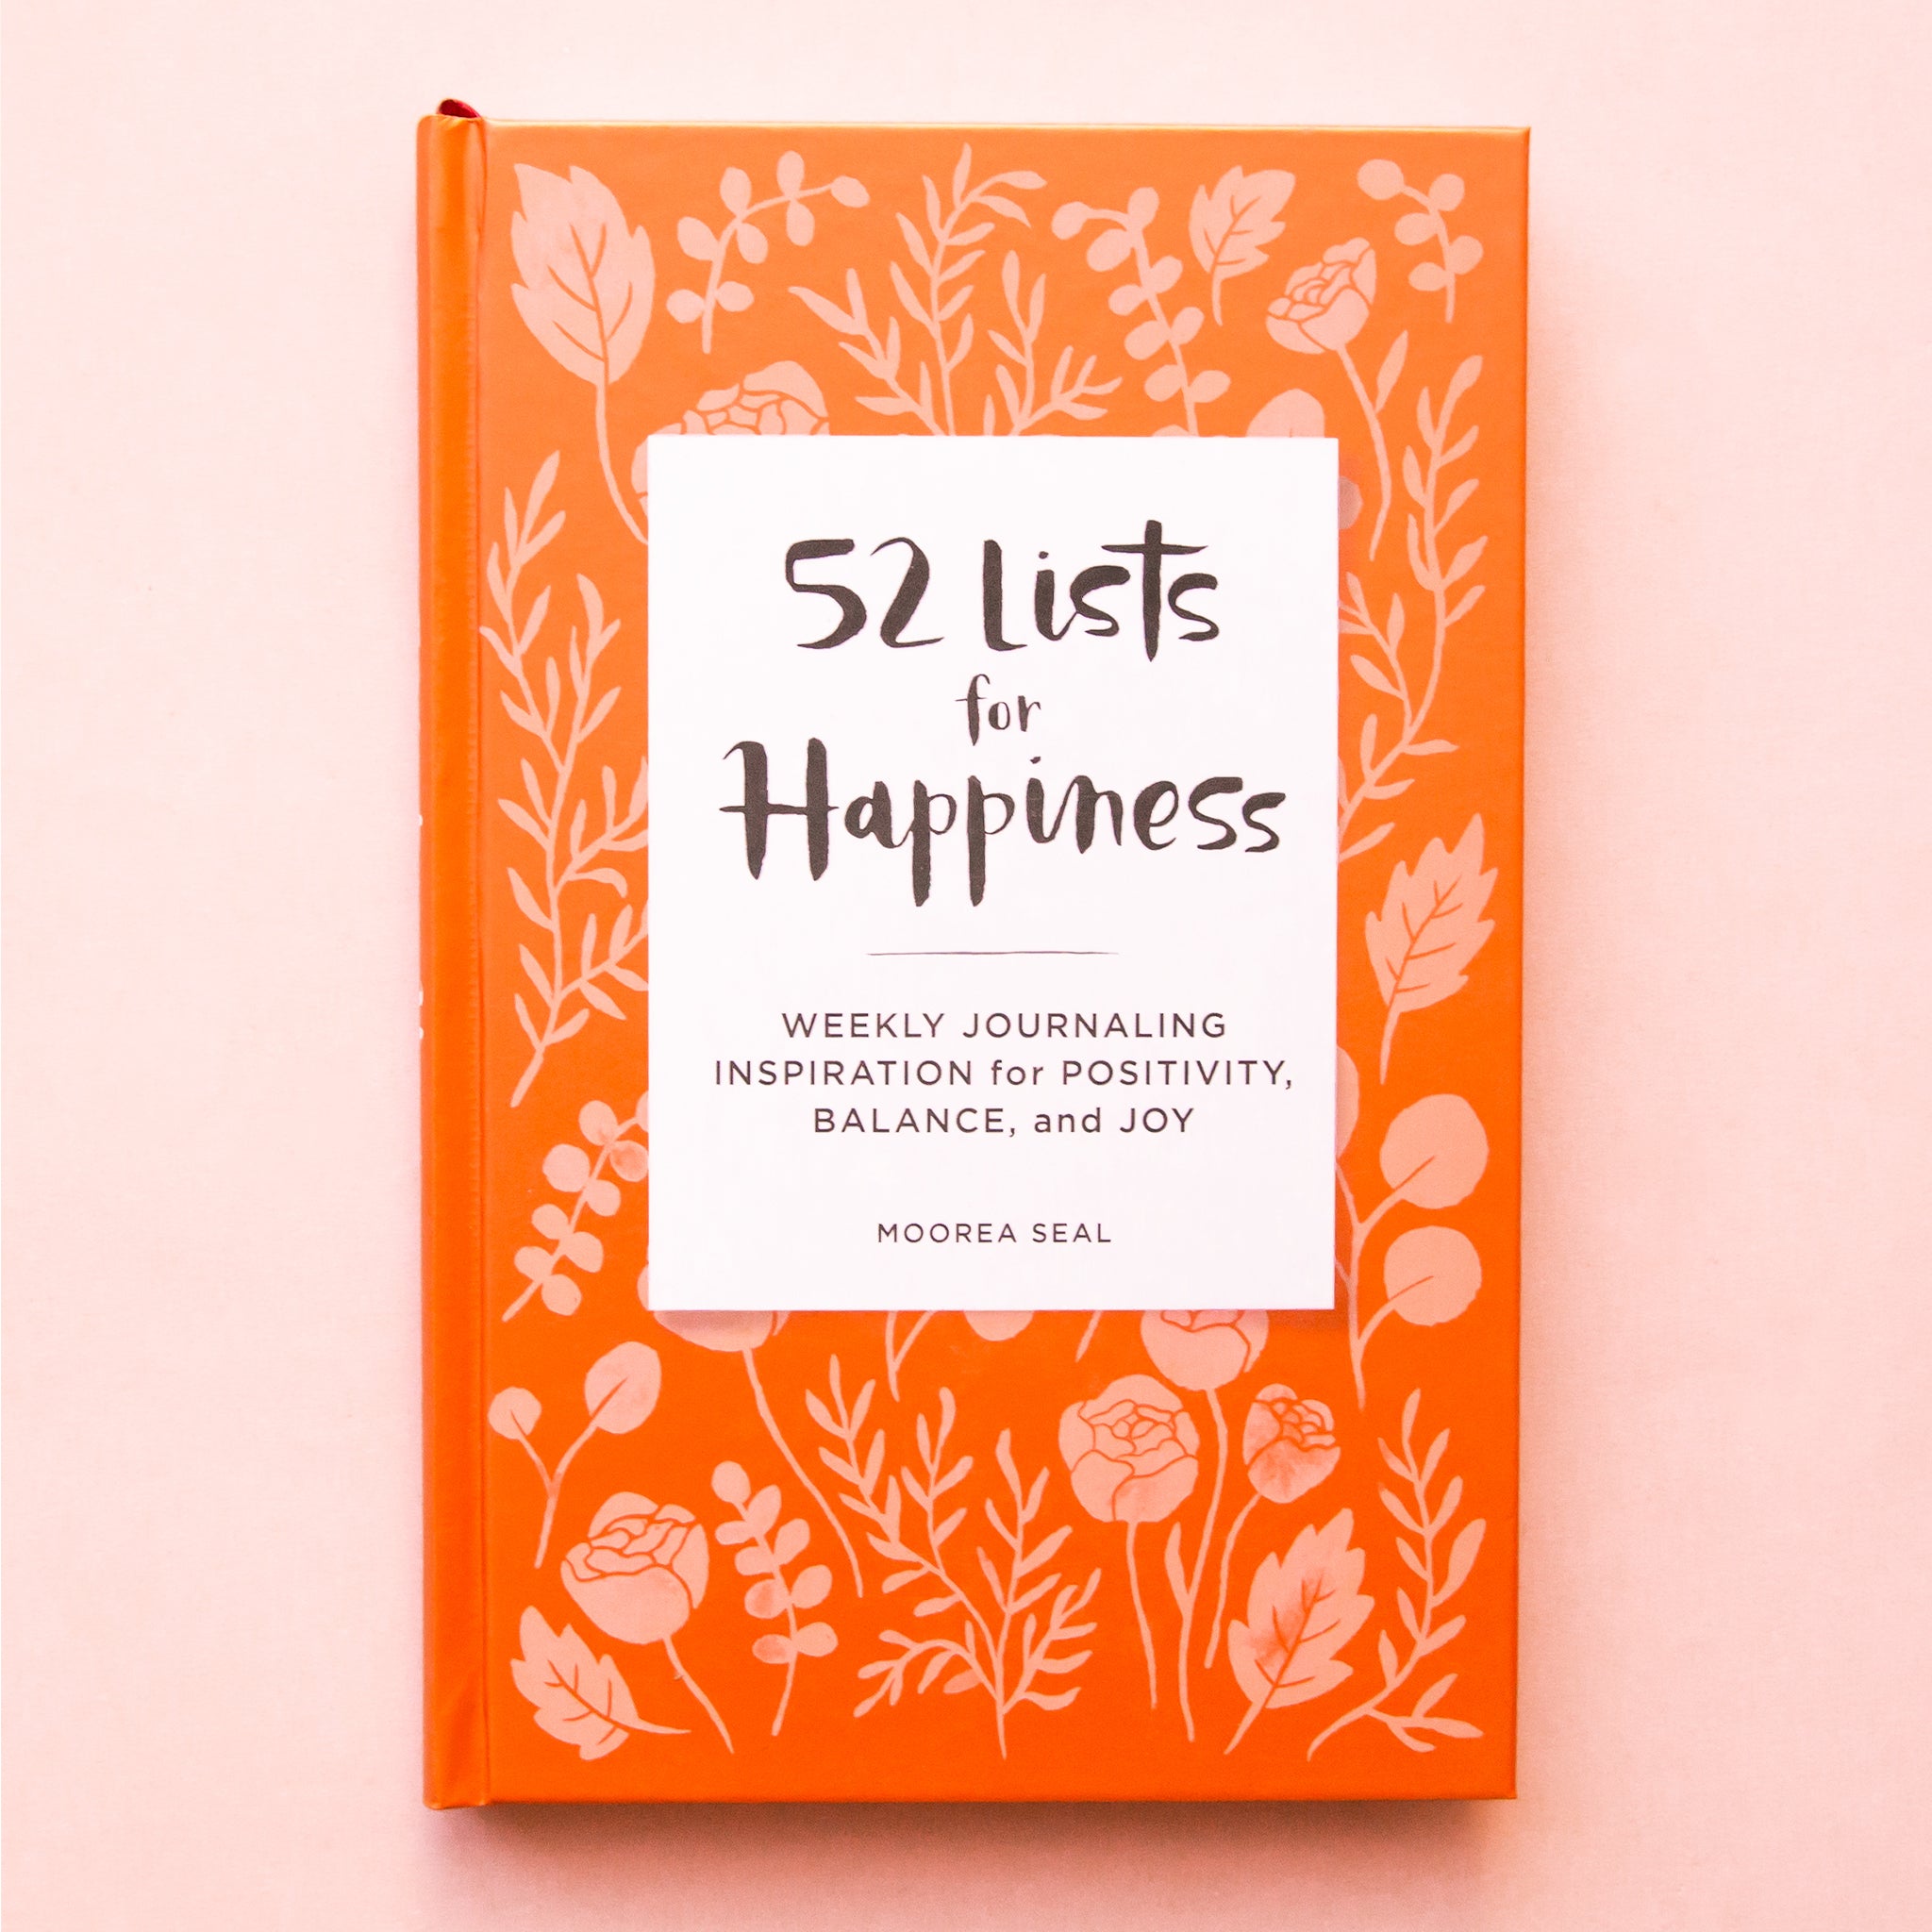 52 lists for happiness. weekly journaling inspiration for positivity, balance, and joy by moorea seal. terracotta colored cover with flower and leaf illustrations.